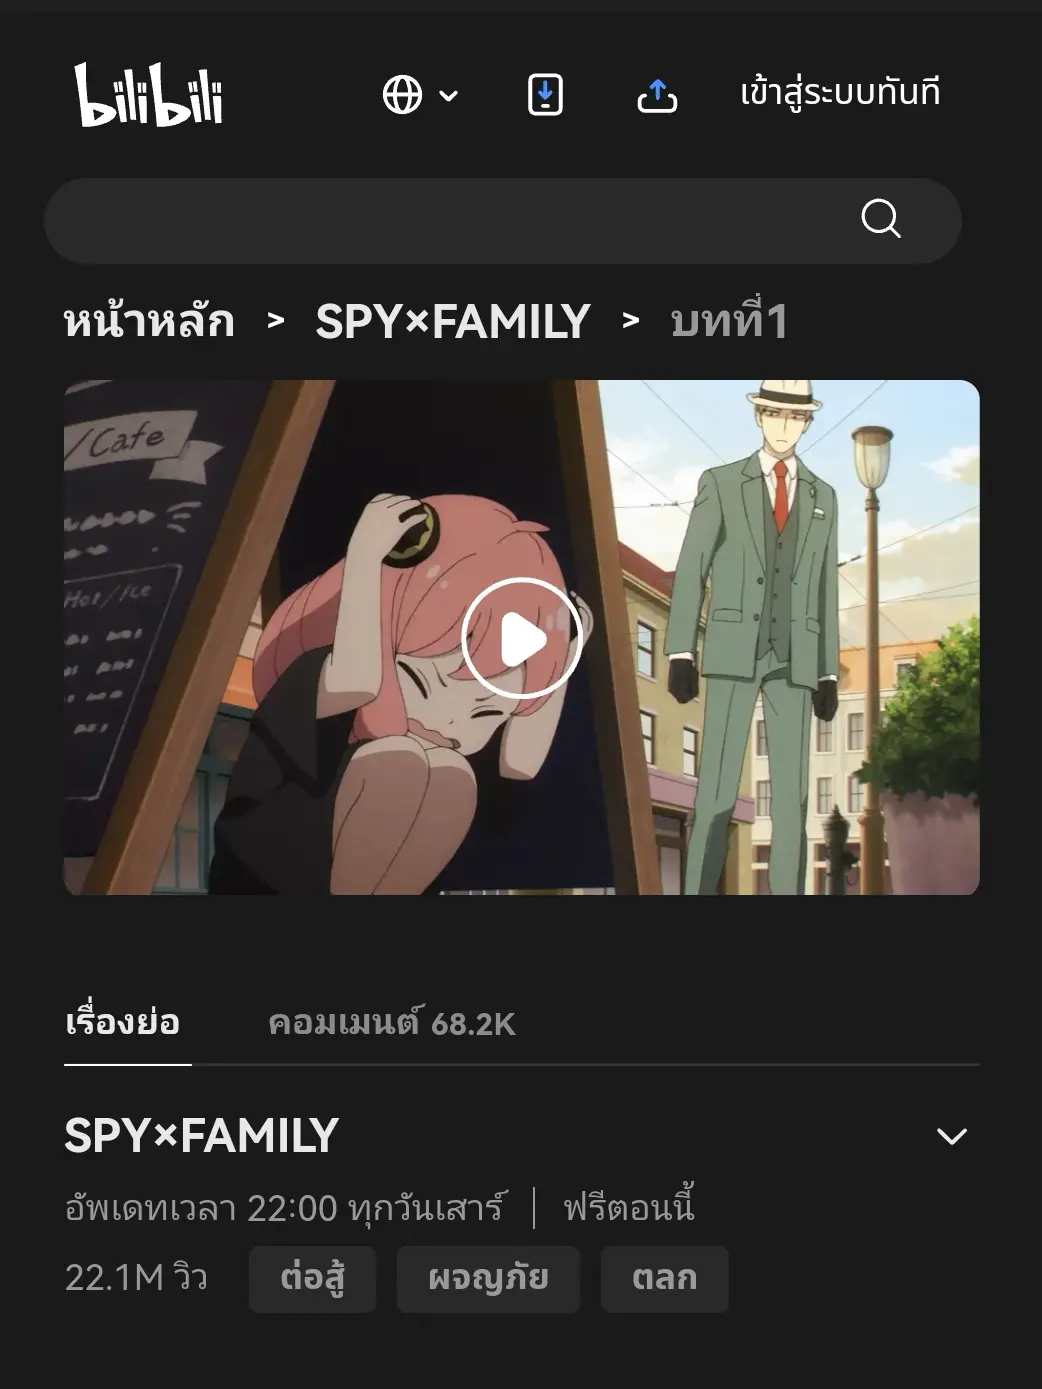 Spy x Family Season 2 Episode 1 Release Date and Time - BiliBili